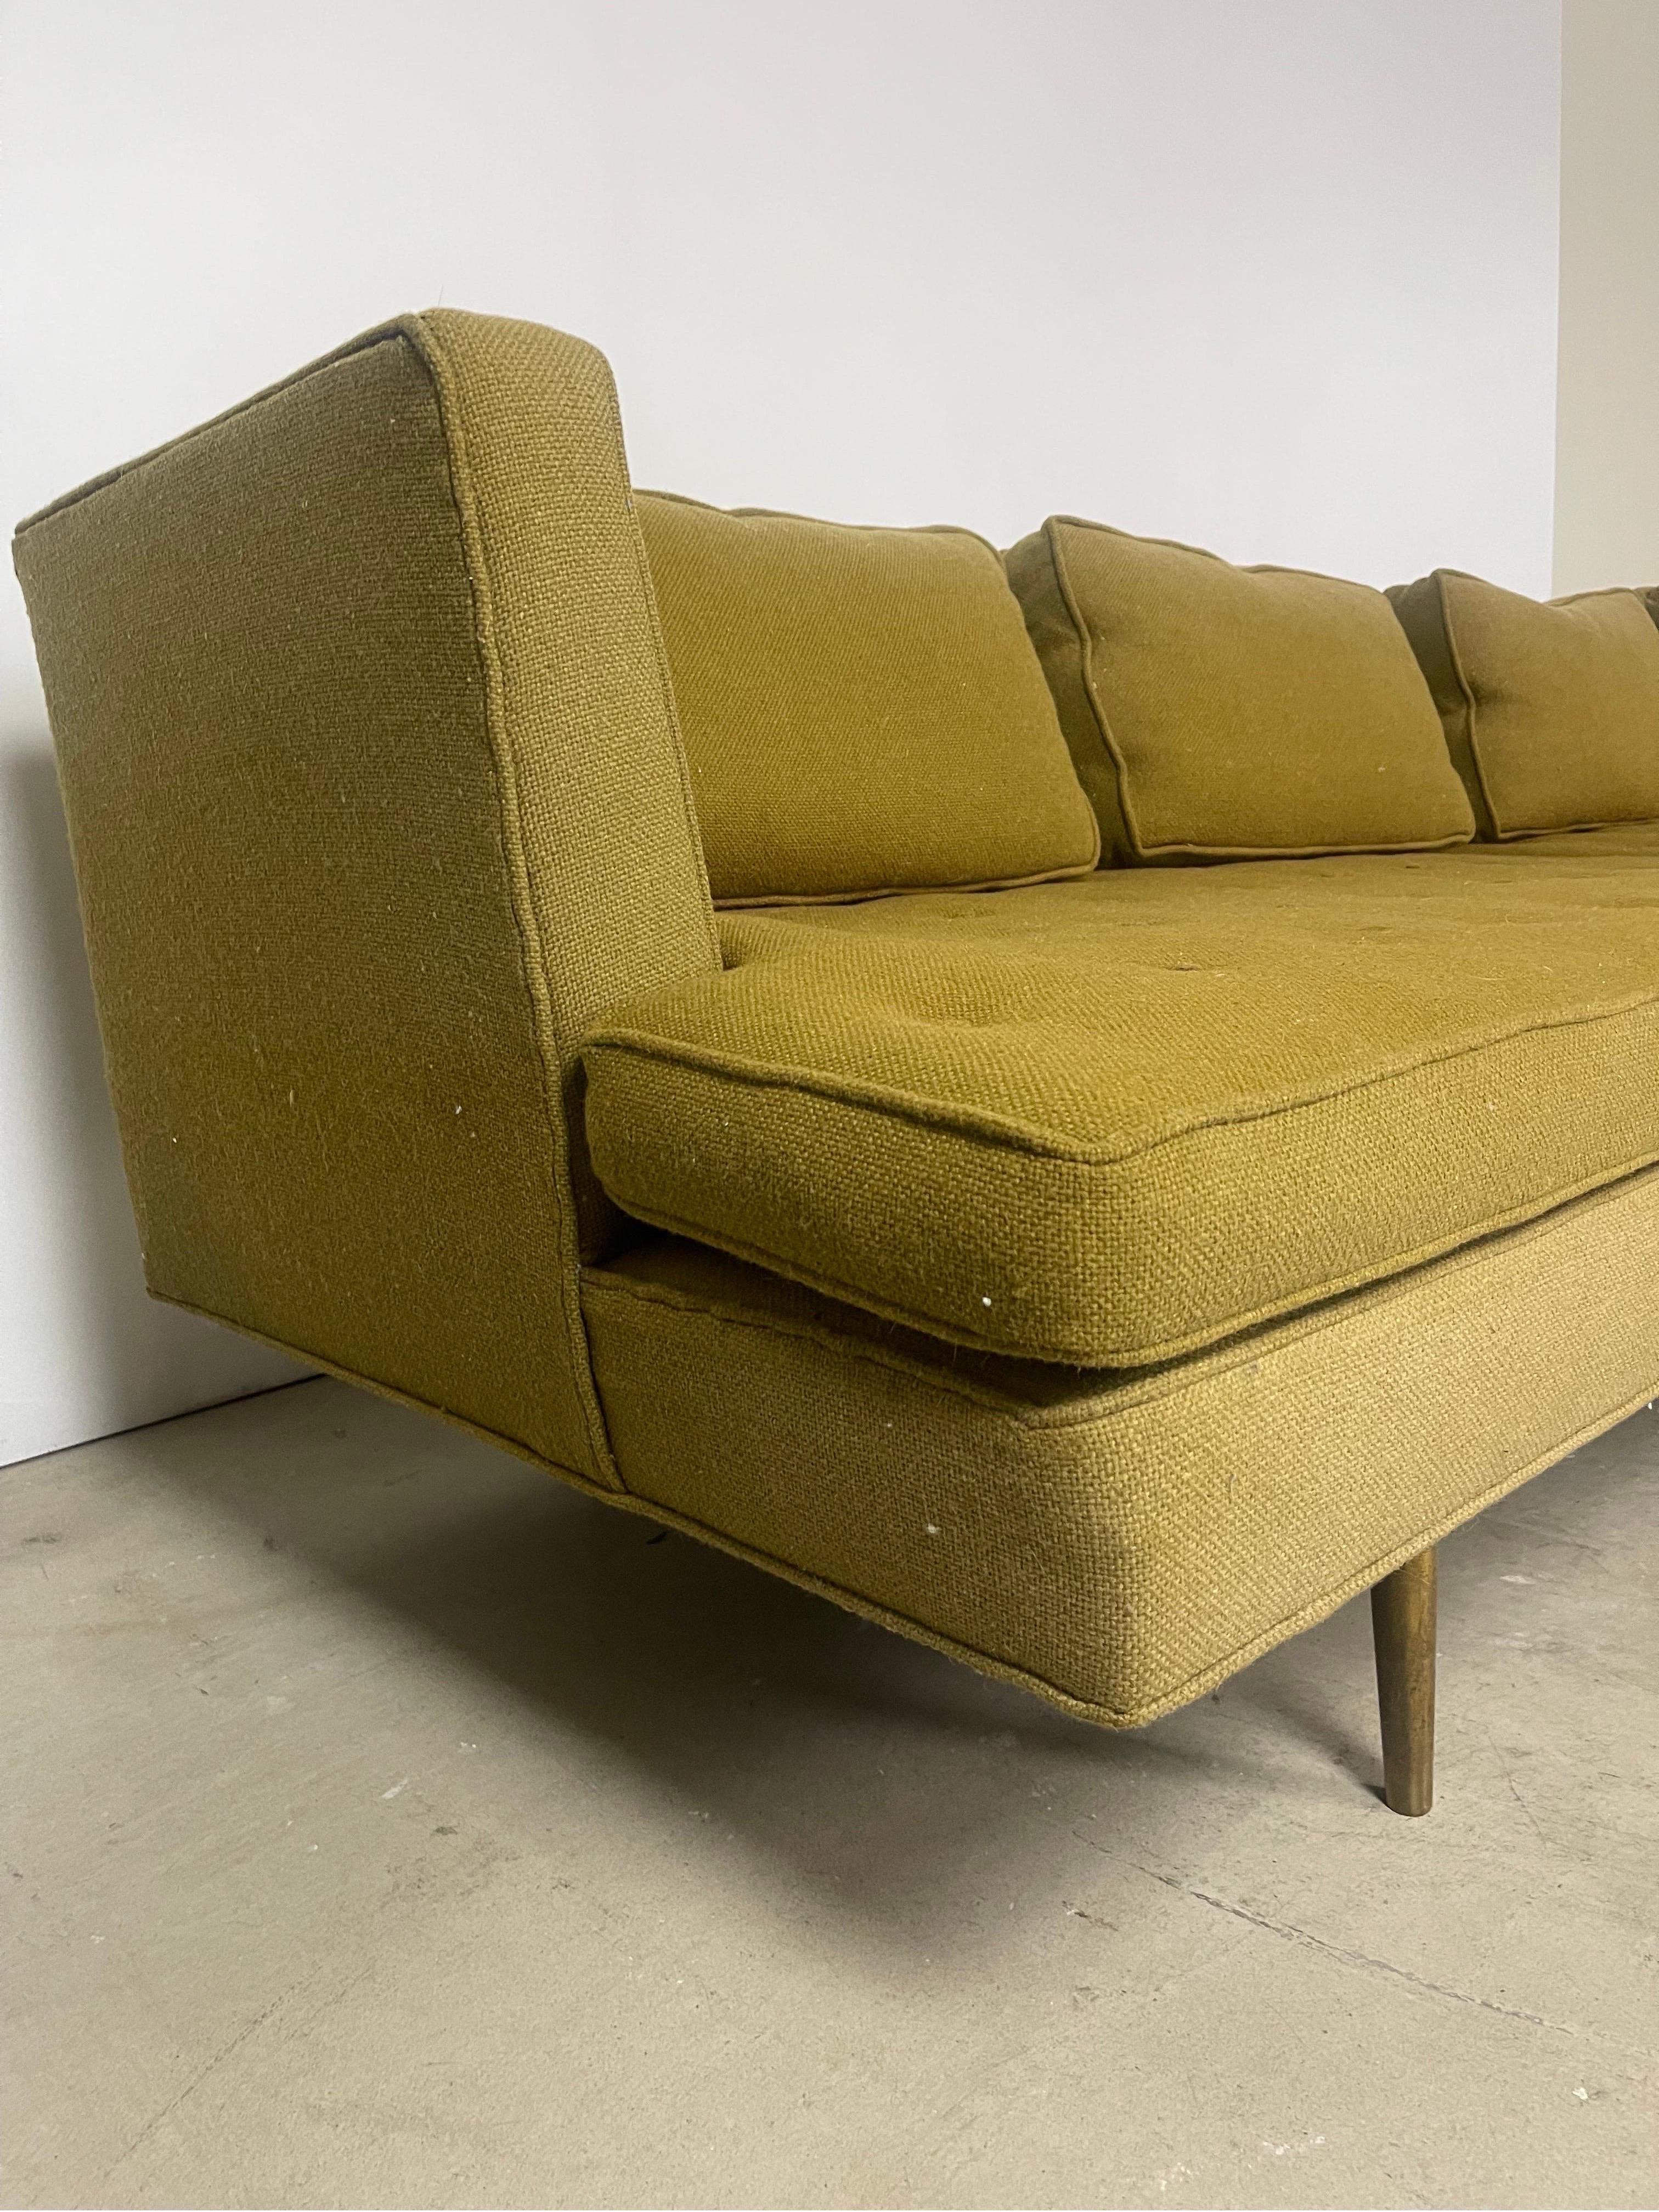 Description:
This is a classic Edward Wormley for Dunbar 4907 sofa with original upholstery and brass legs. This sofa showcases Wormley's signature design style, featuring a sleek silhouette with clean lines and a low profile. The original green